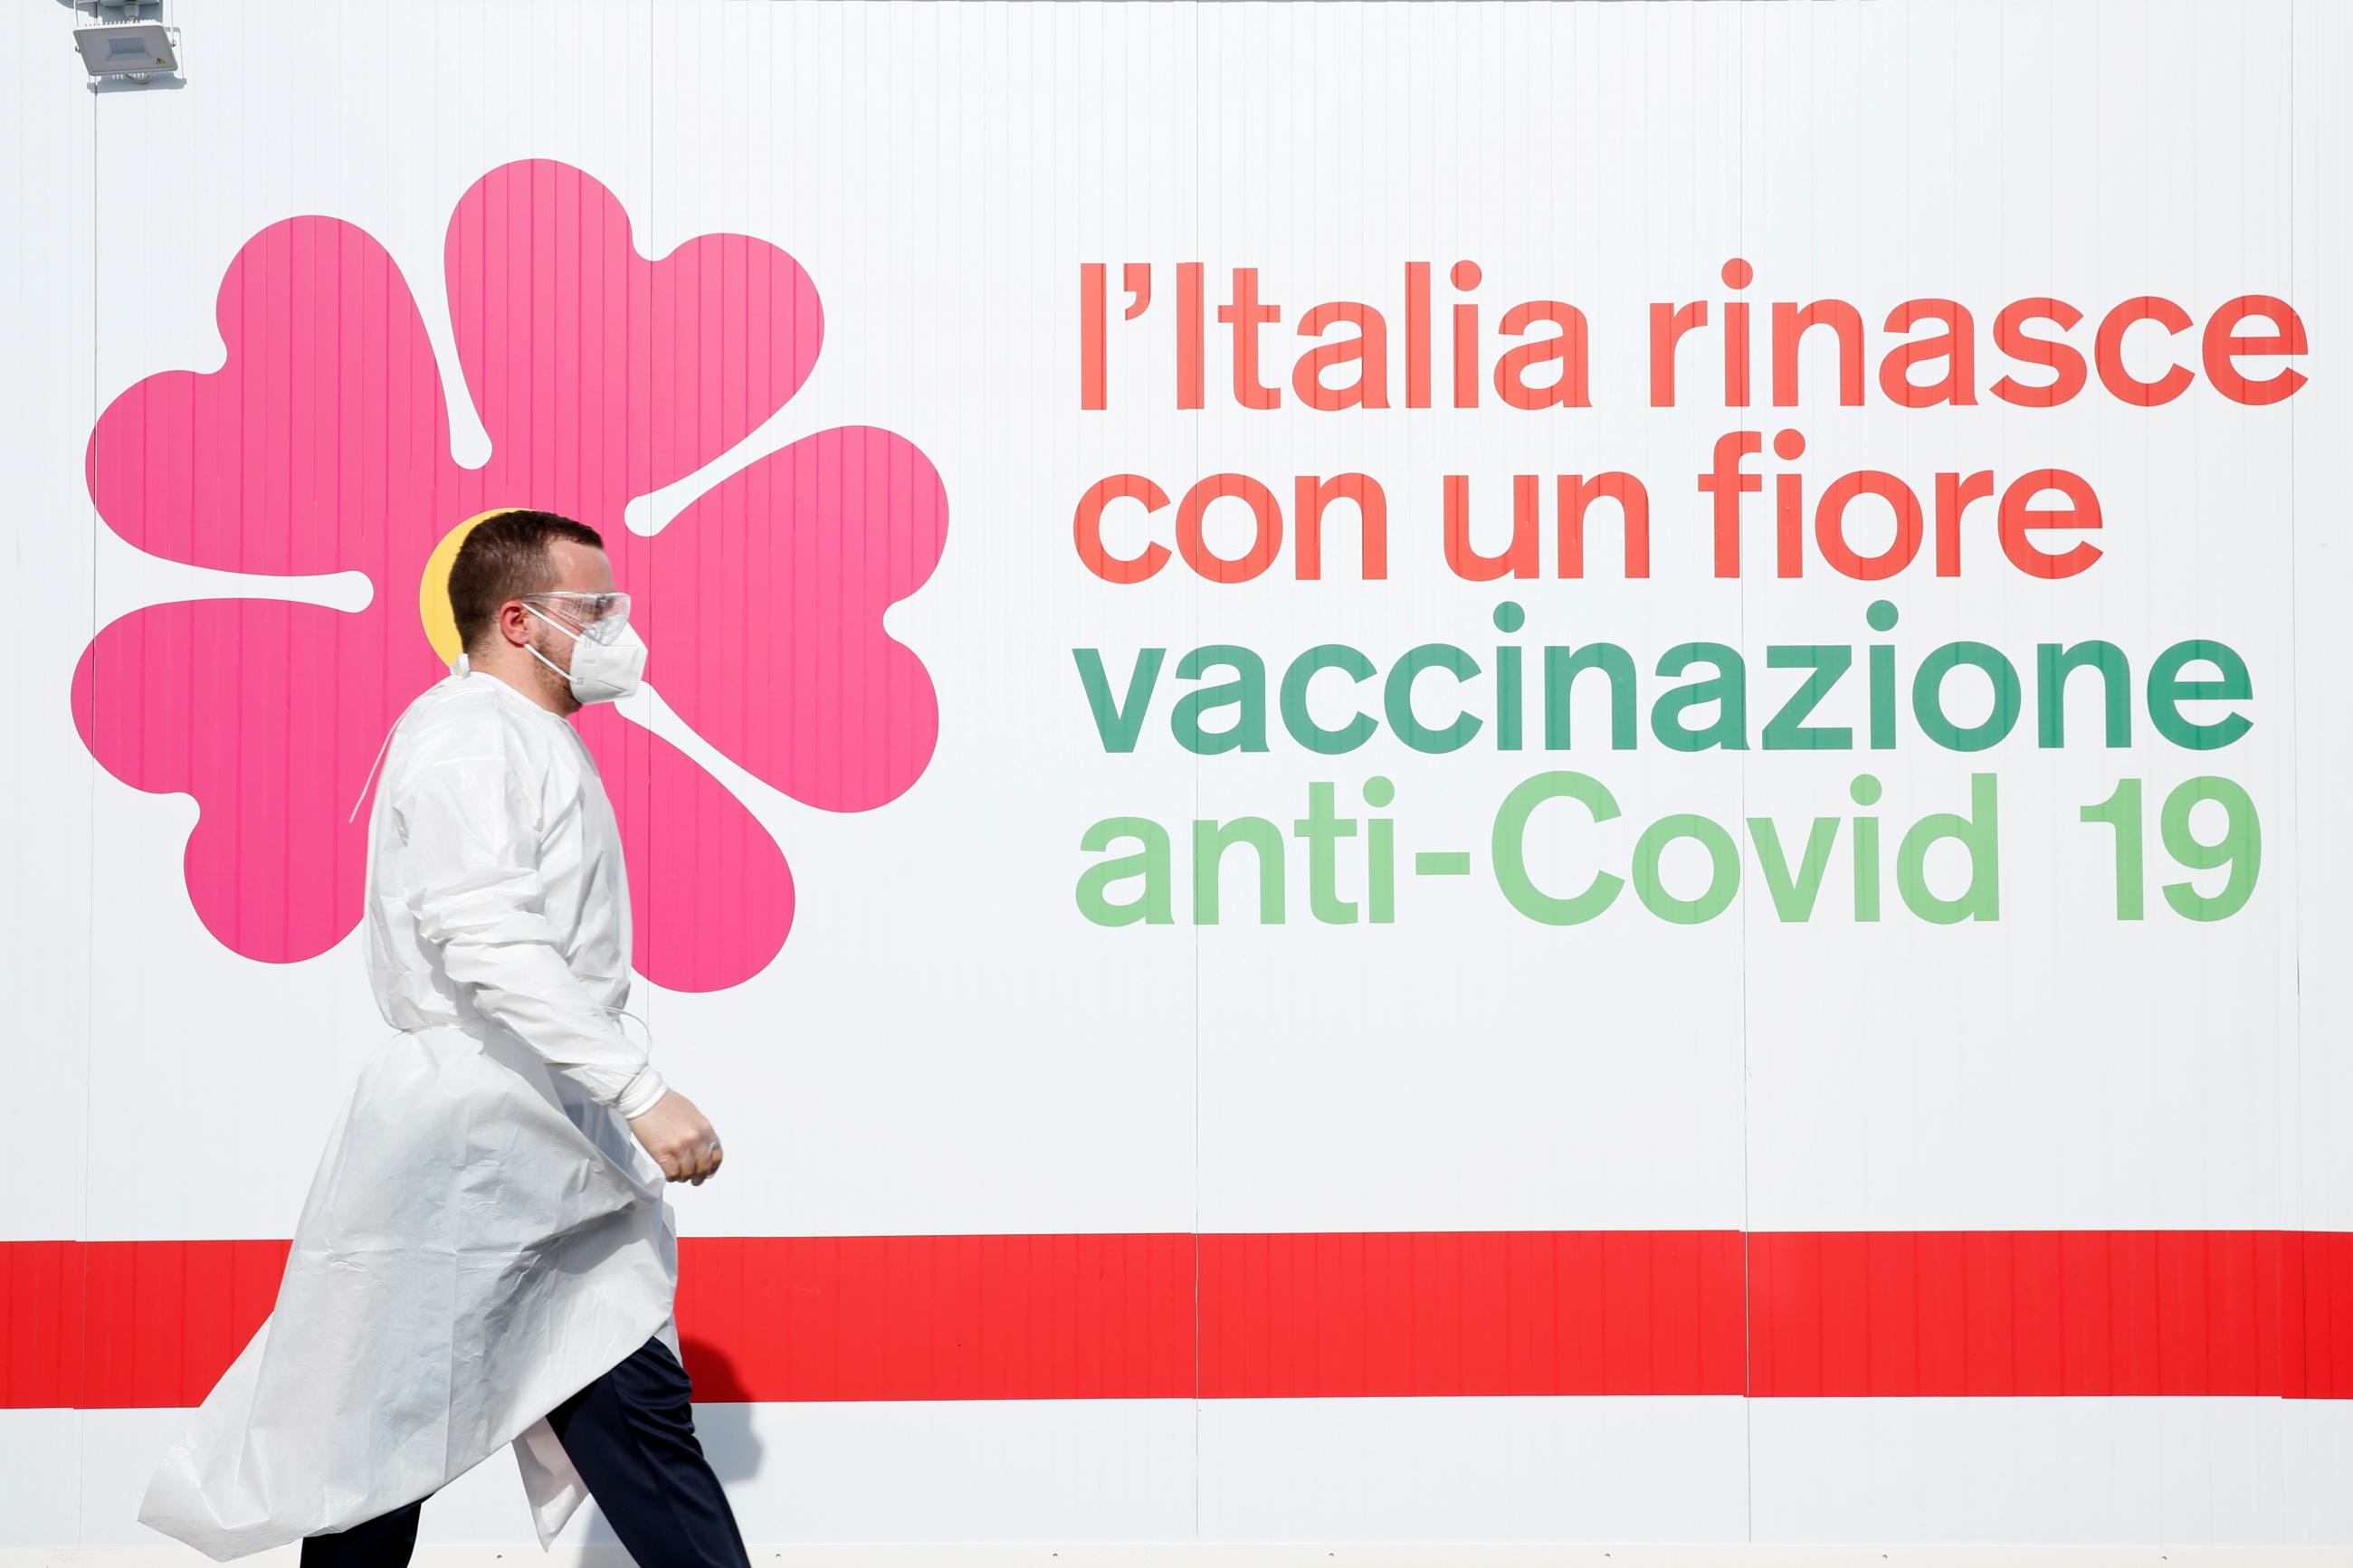 A man walks outside a tent during preparations to turn the long-term car park at Fiumicino airport into a coronavirus disease (COVID-19) vaccination centre, in Rome, Italy, February 5, 2021. 